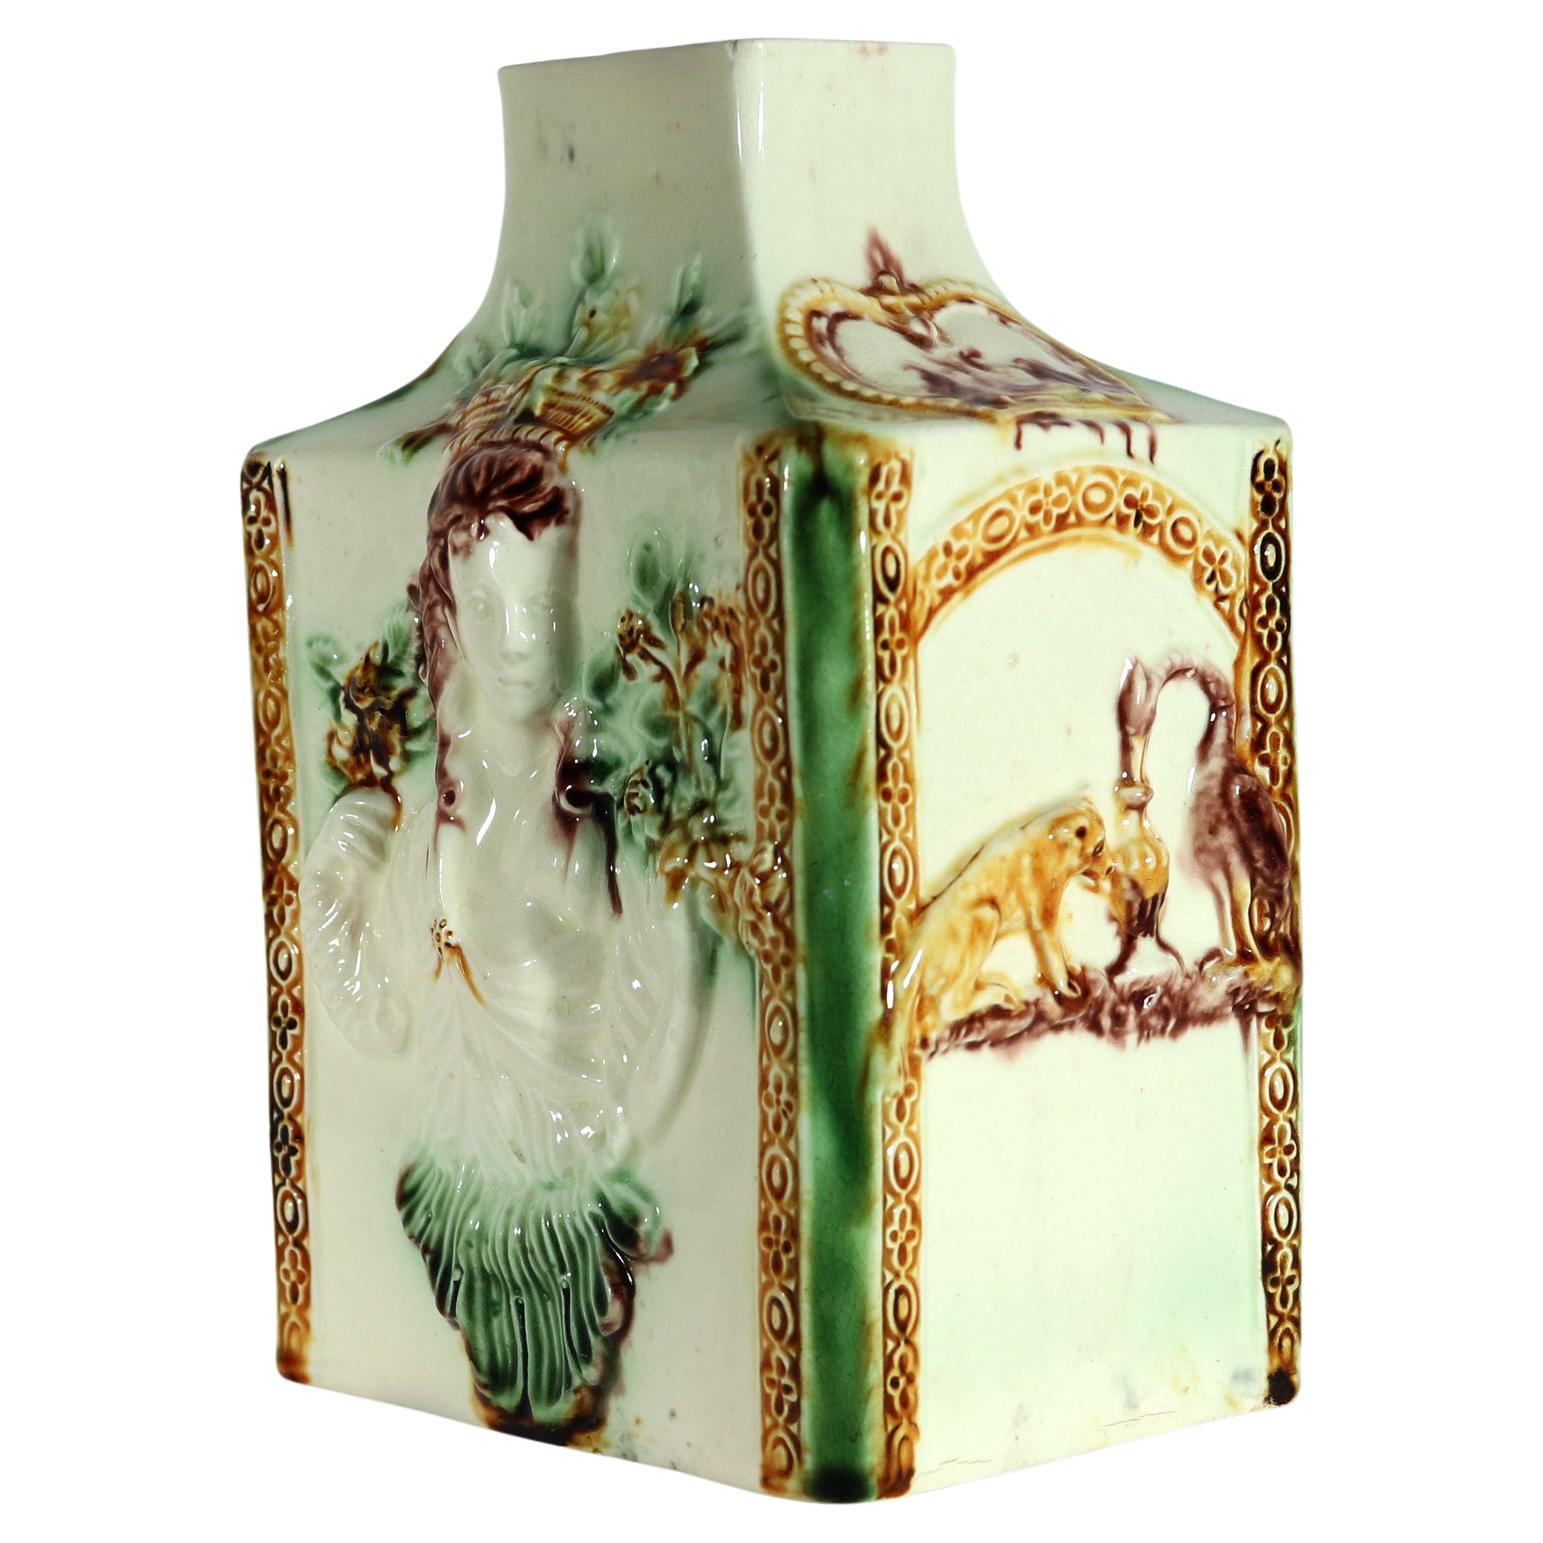 18th-Century Creamware Whieldon-type Large Molded Tea Caddy,
Fauna & The Aesop's Fable of The Fox and Stork,
Staffordshire or Bovey Tracey,
 Circa 1770-5

The oversized creamware tea caddy or cannister is  decorated in underglaze oxide colors.  It